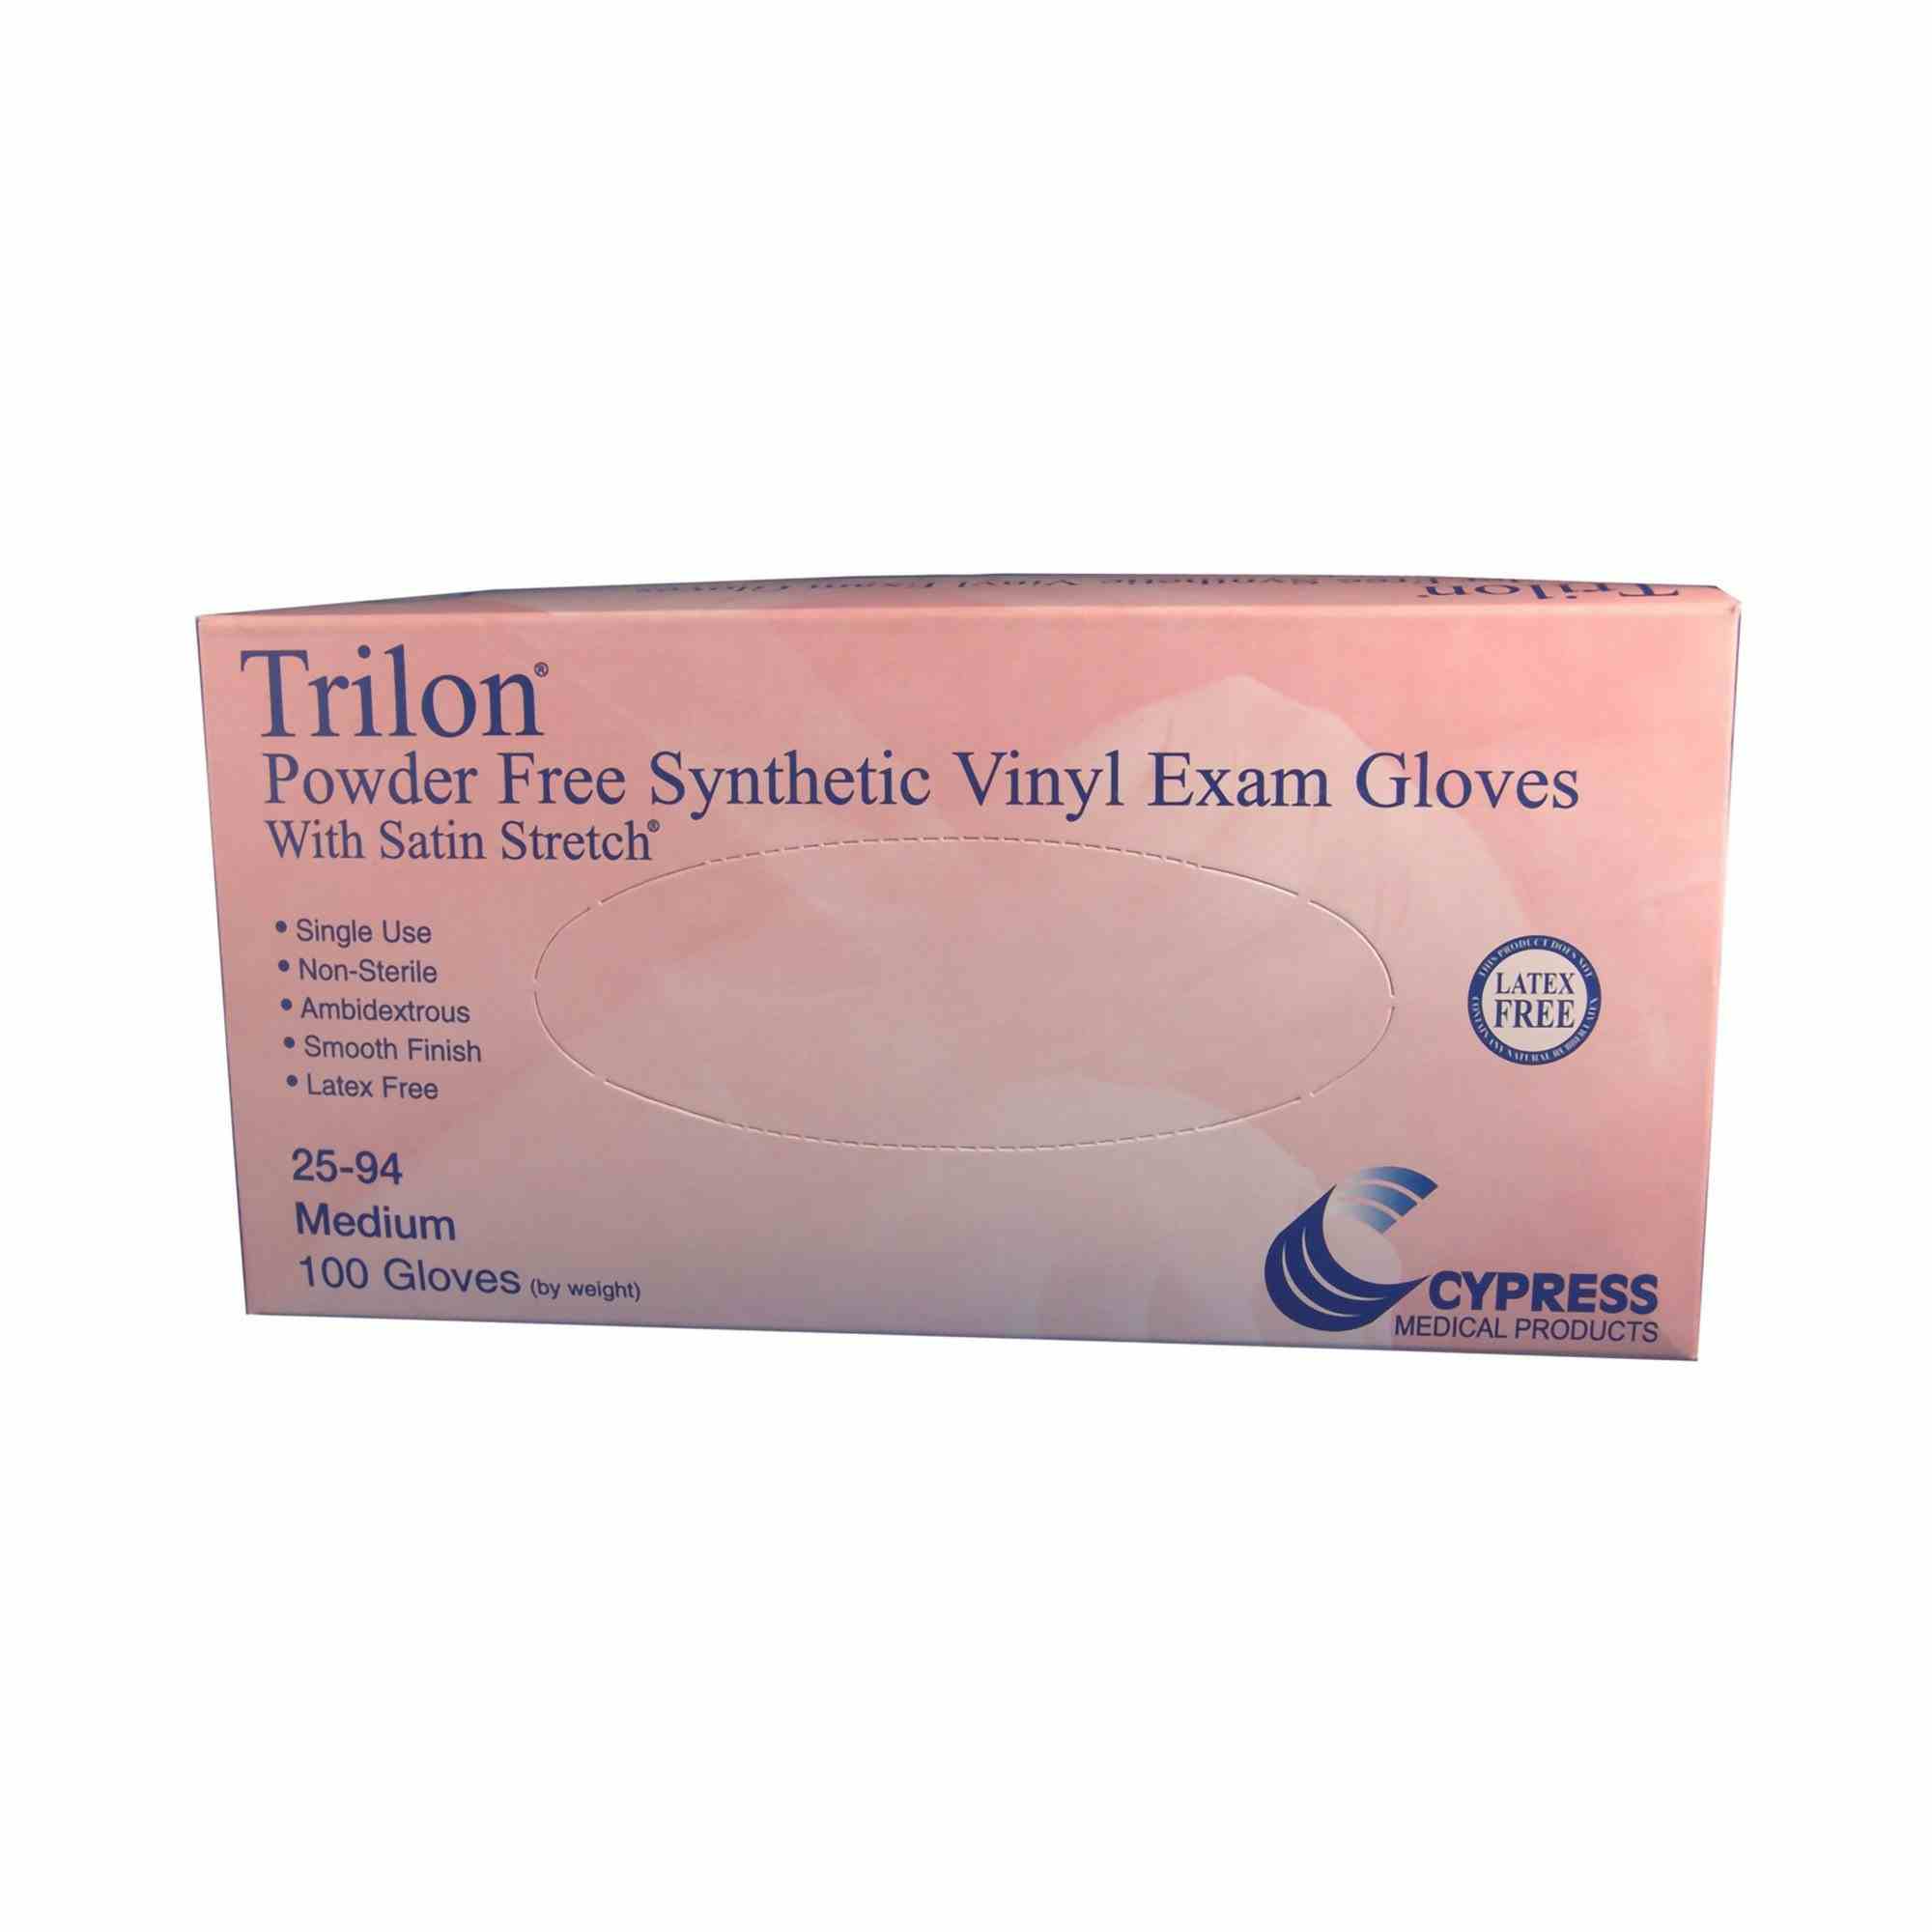 Trilon Powder Free Synthetic Vinyl Exam Glove, Clear, 25-92, Small - Box of 100